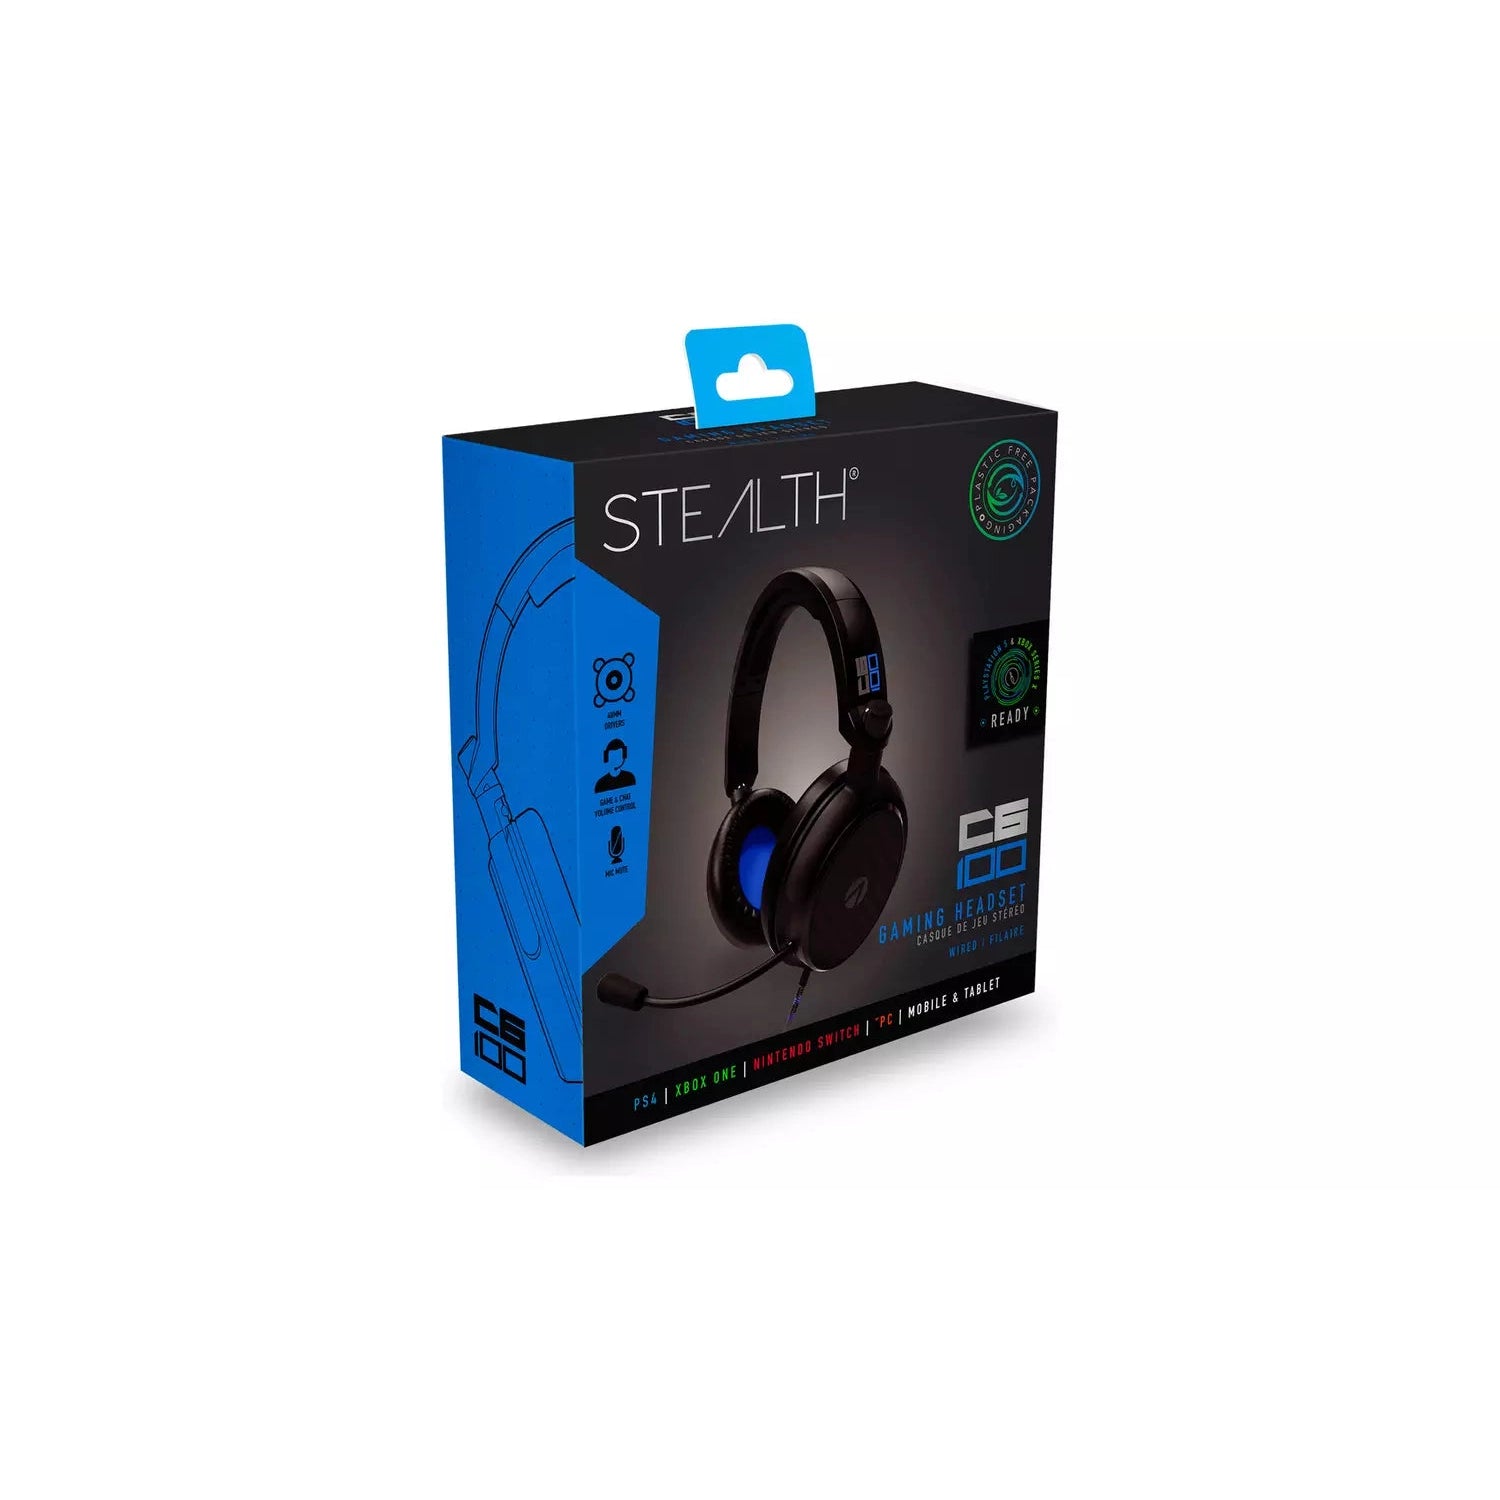 Stealth C6-100 Gaming Headset and Stock Must Stand | Go